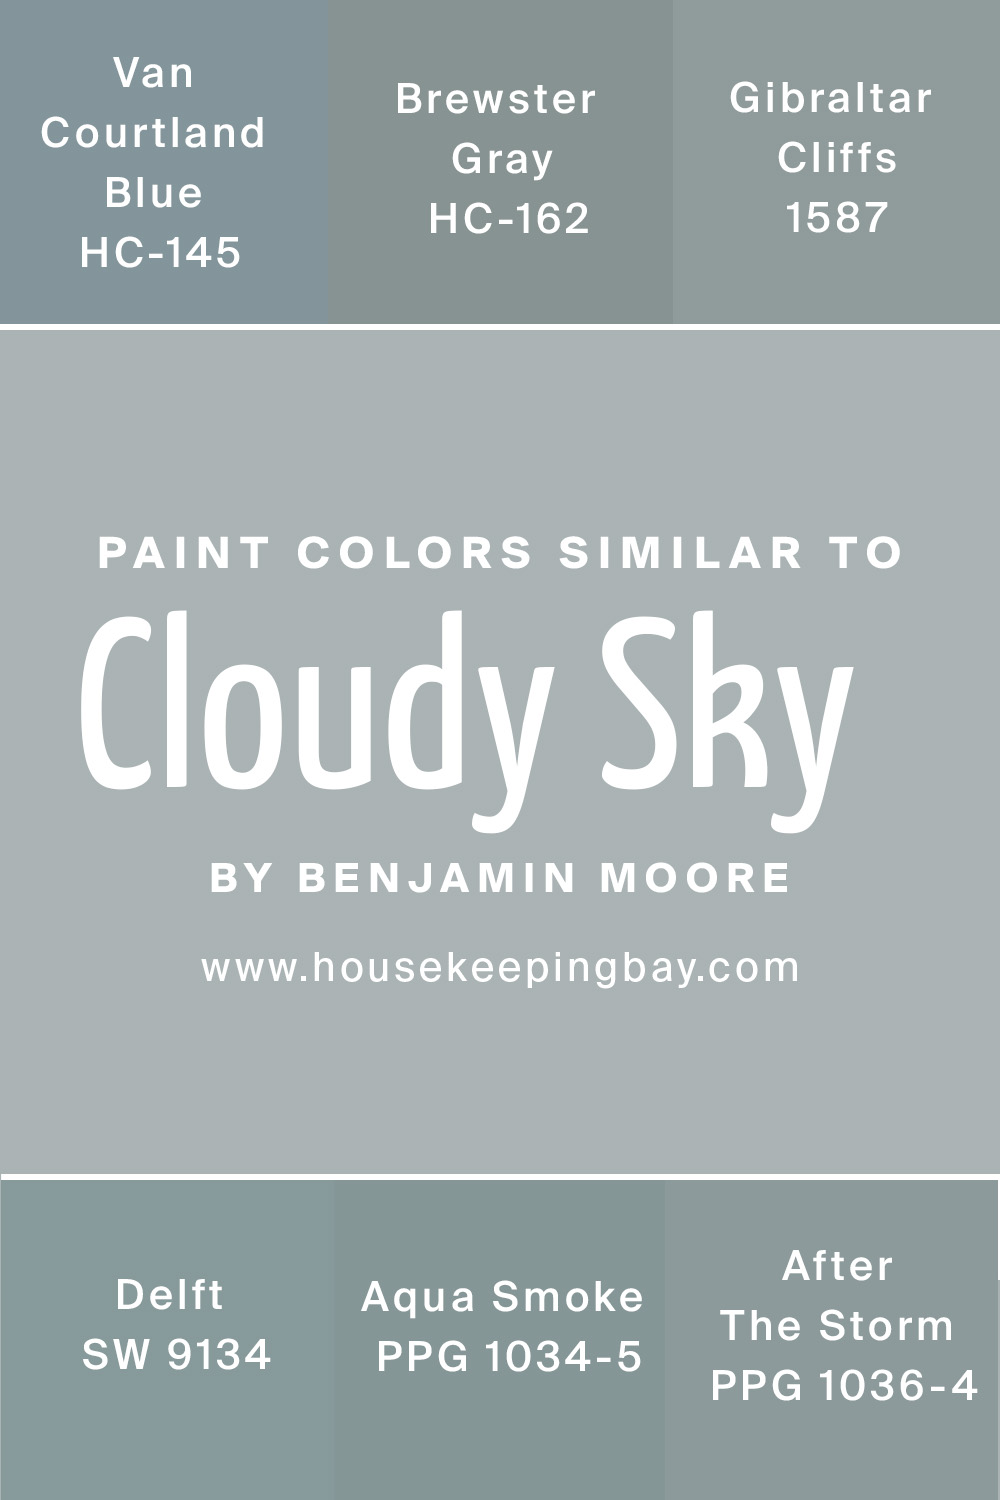 paint colors similar to cloudy sky 2122-30 by benjamin moore